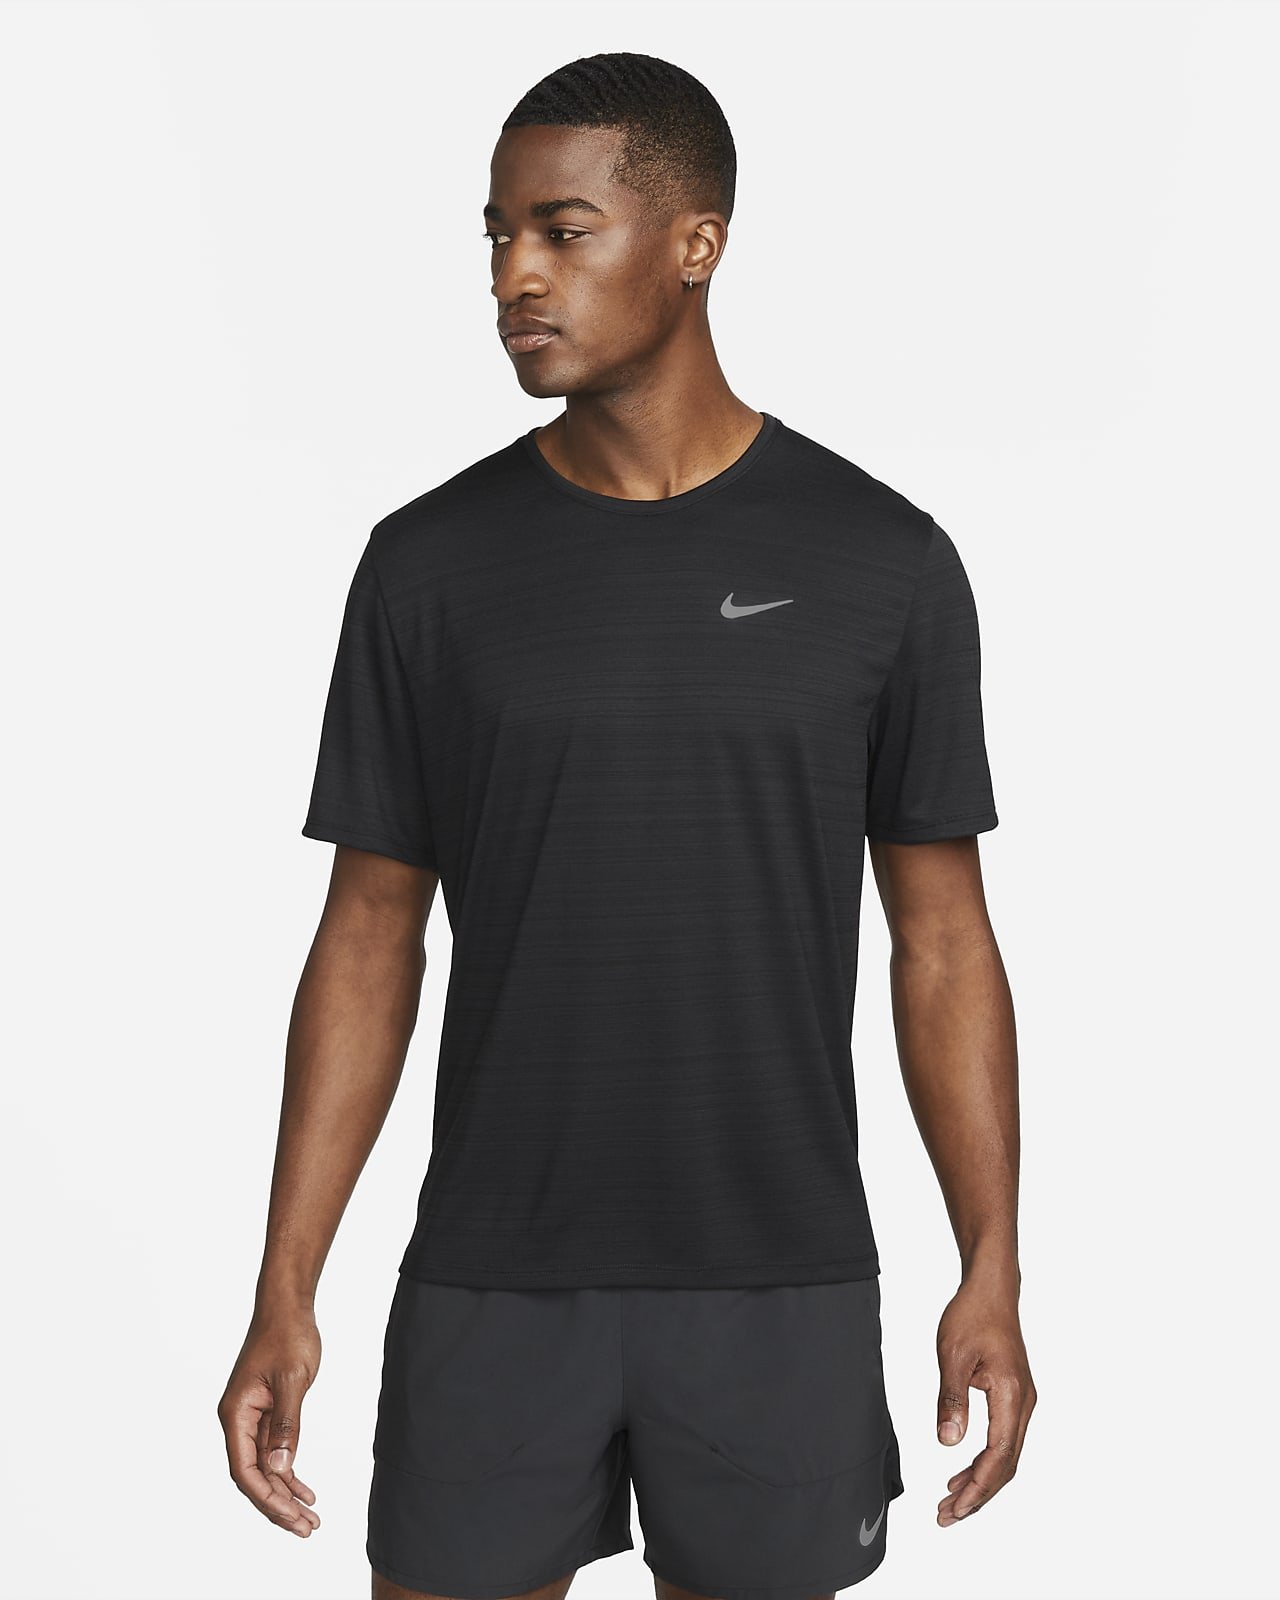 The Ultimate Guide To Nike Dri Fit Miler T-Shirt: All You Need To Know!